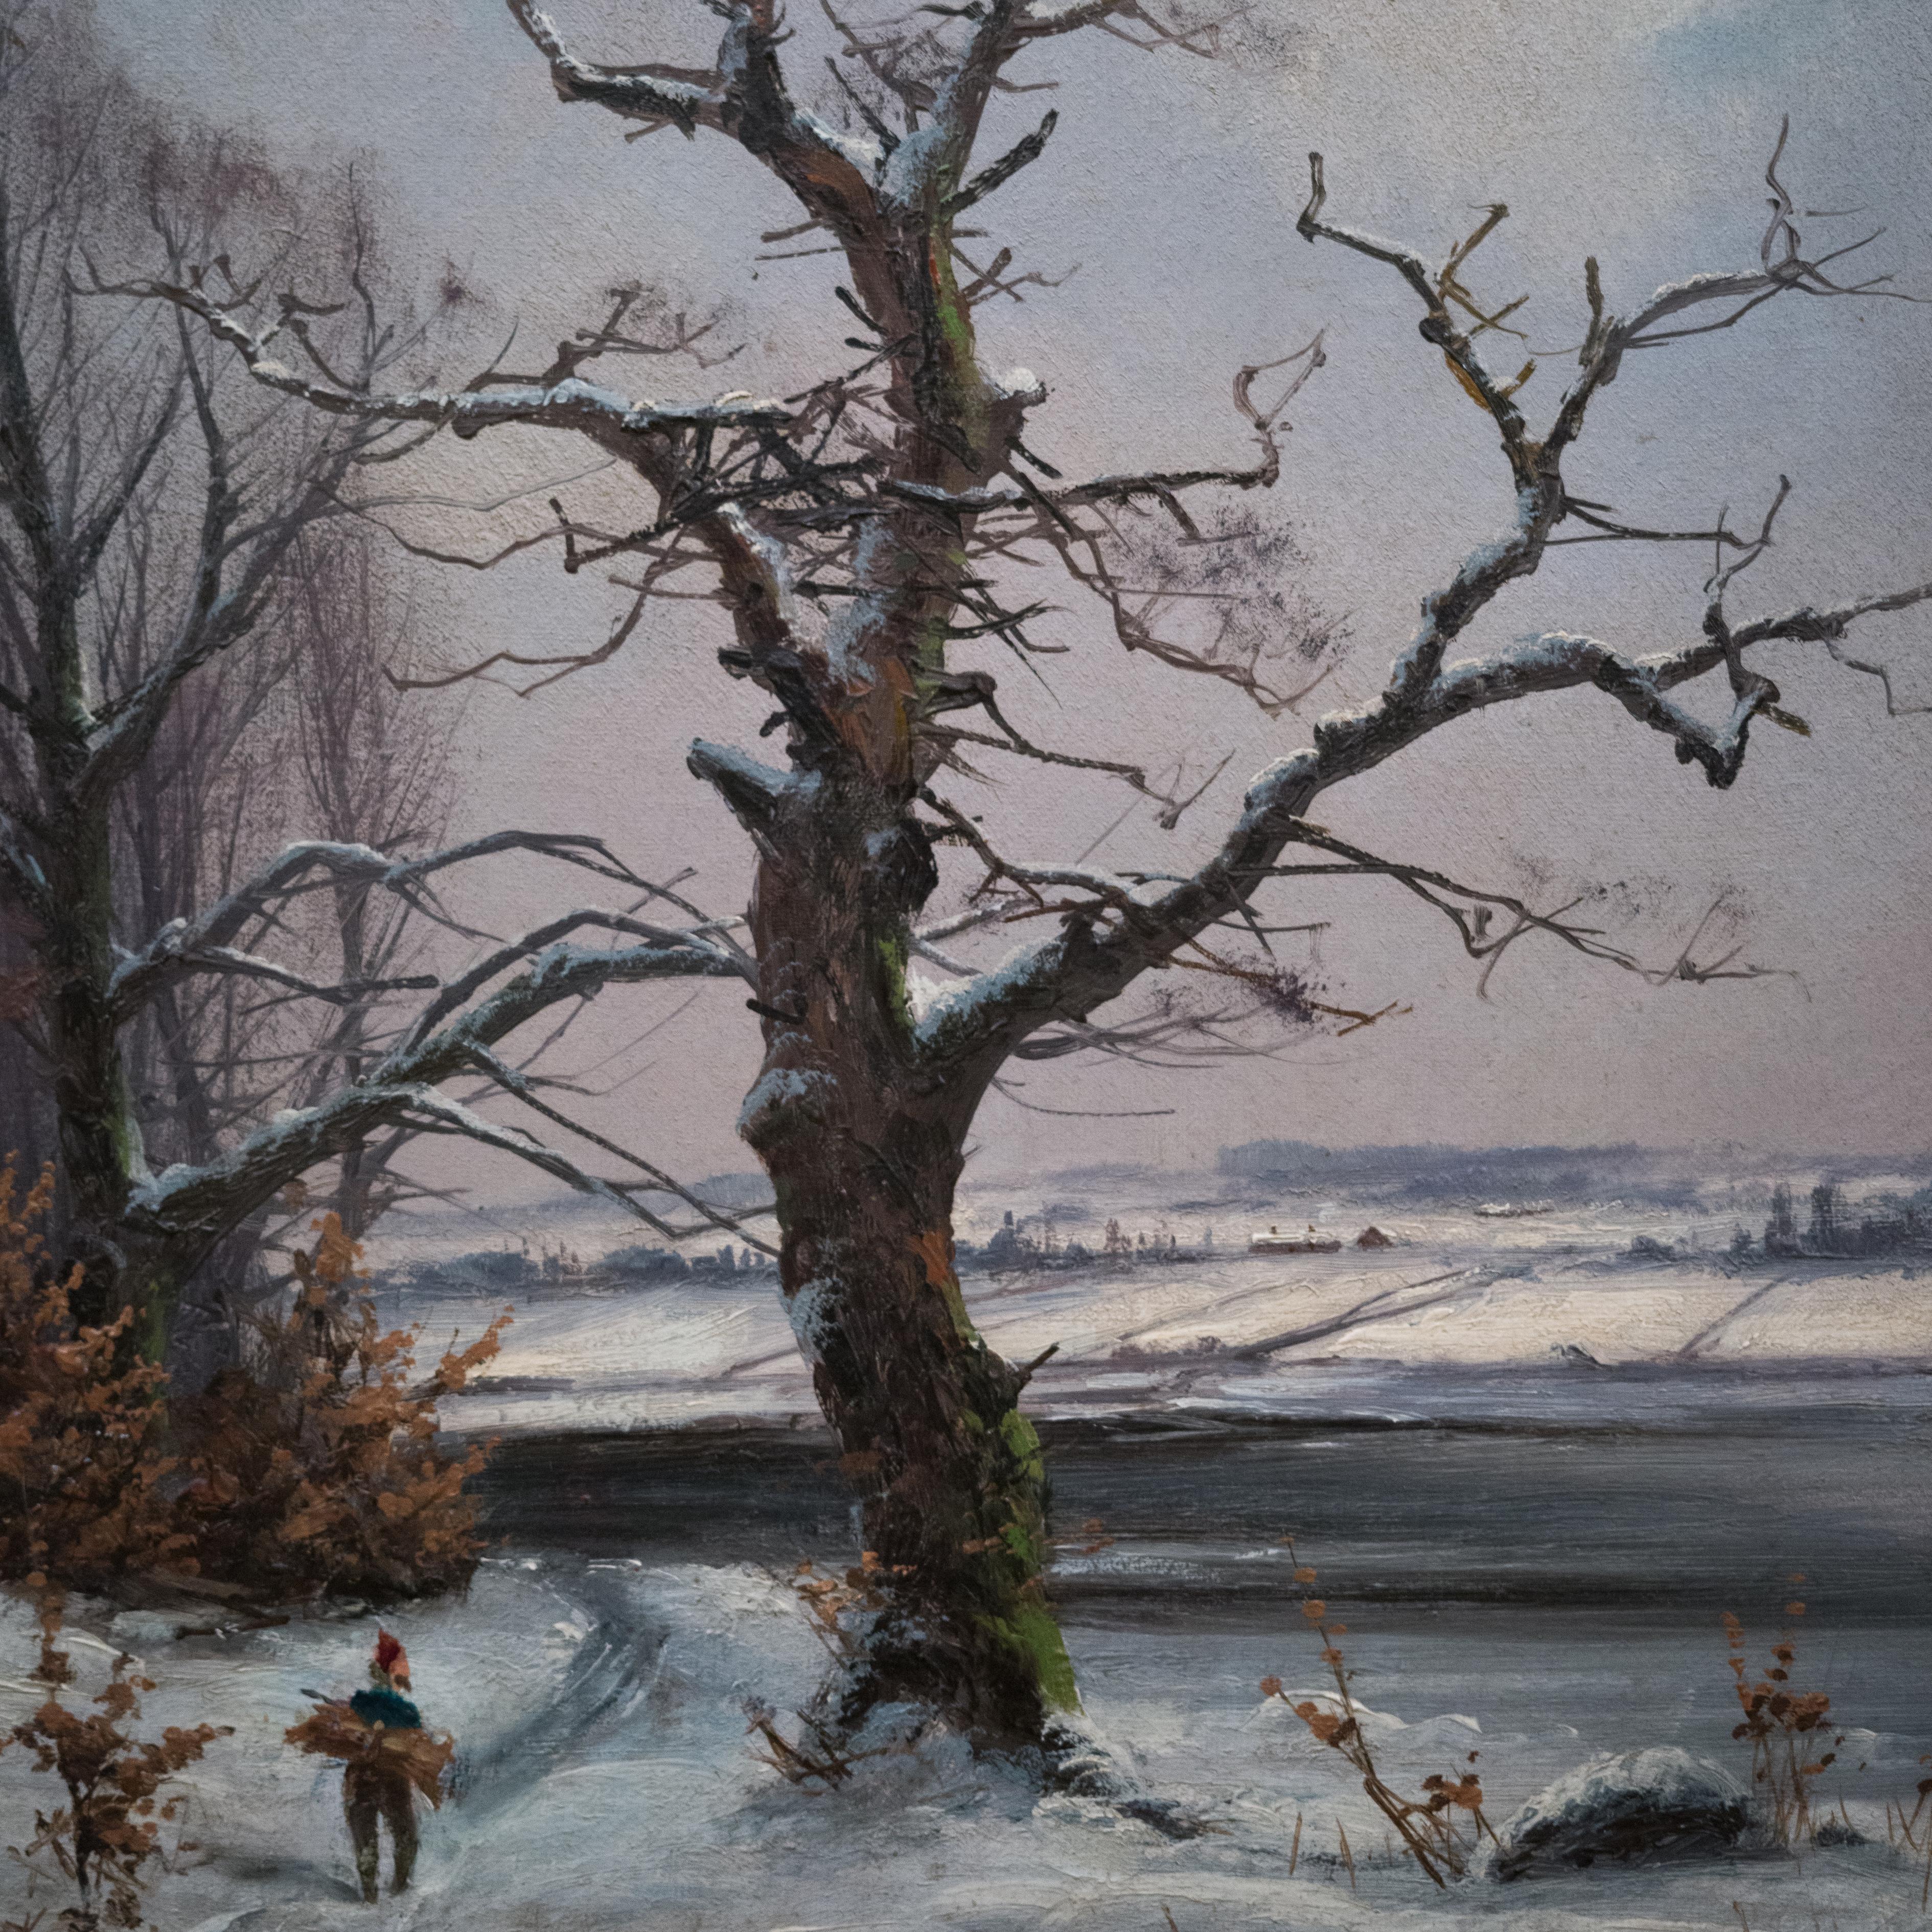 Nils Hans Christiansen (1850-1929) Denmark

Winter Landscape With an Old Tree

oil on canvas
late 19th century
signed 
canvas dimensions 15.94 x 12.79 inches (40.5 x 32.5 cm)
frame 20.47 x 17.12 inches (52 x 43.5 cm)

Provenance: 
A Swedish private